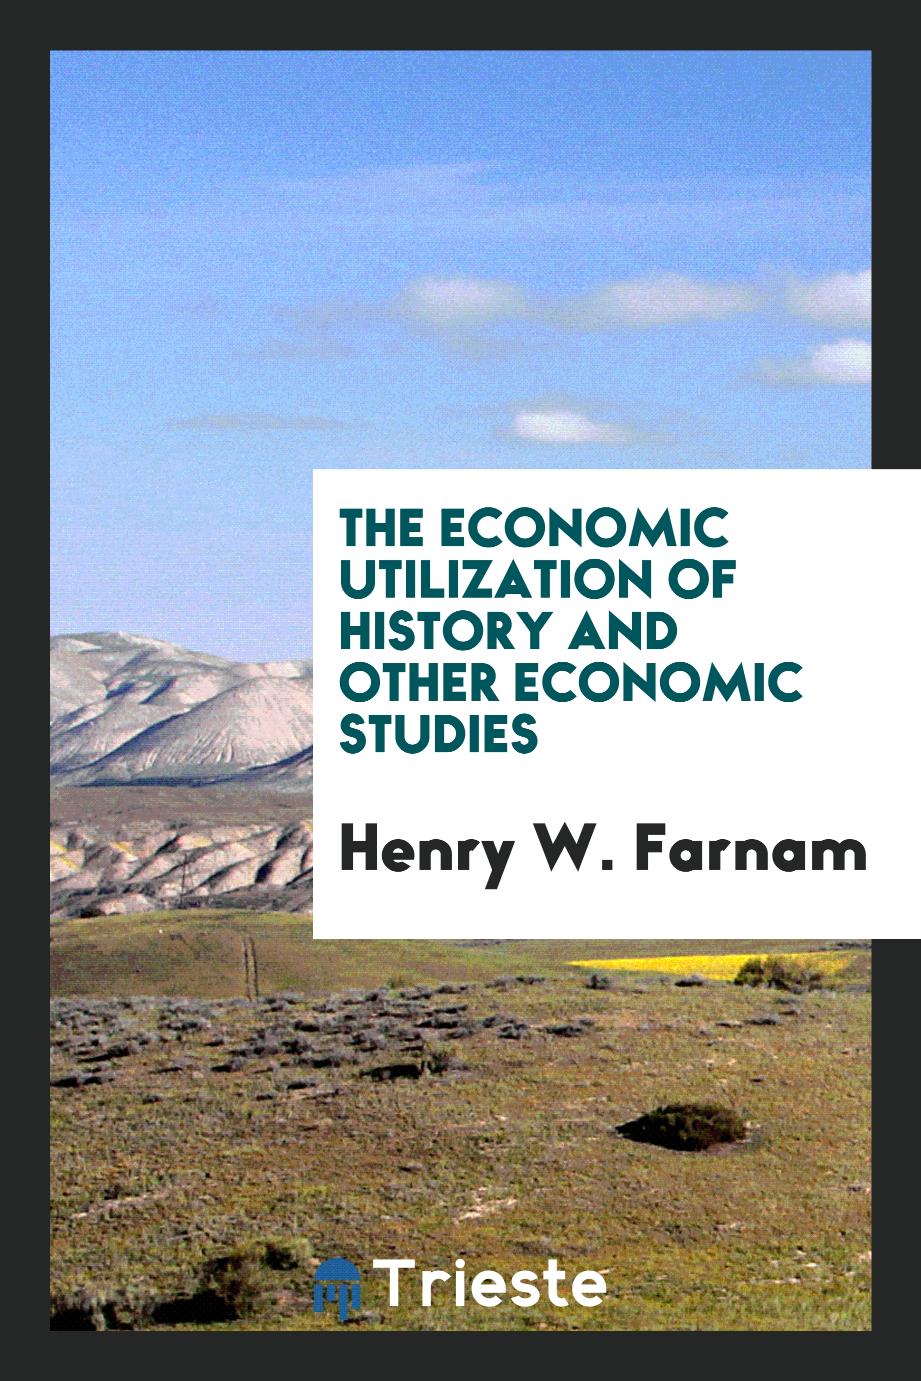 The Economic Utilization of History and Other Economic Studies